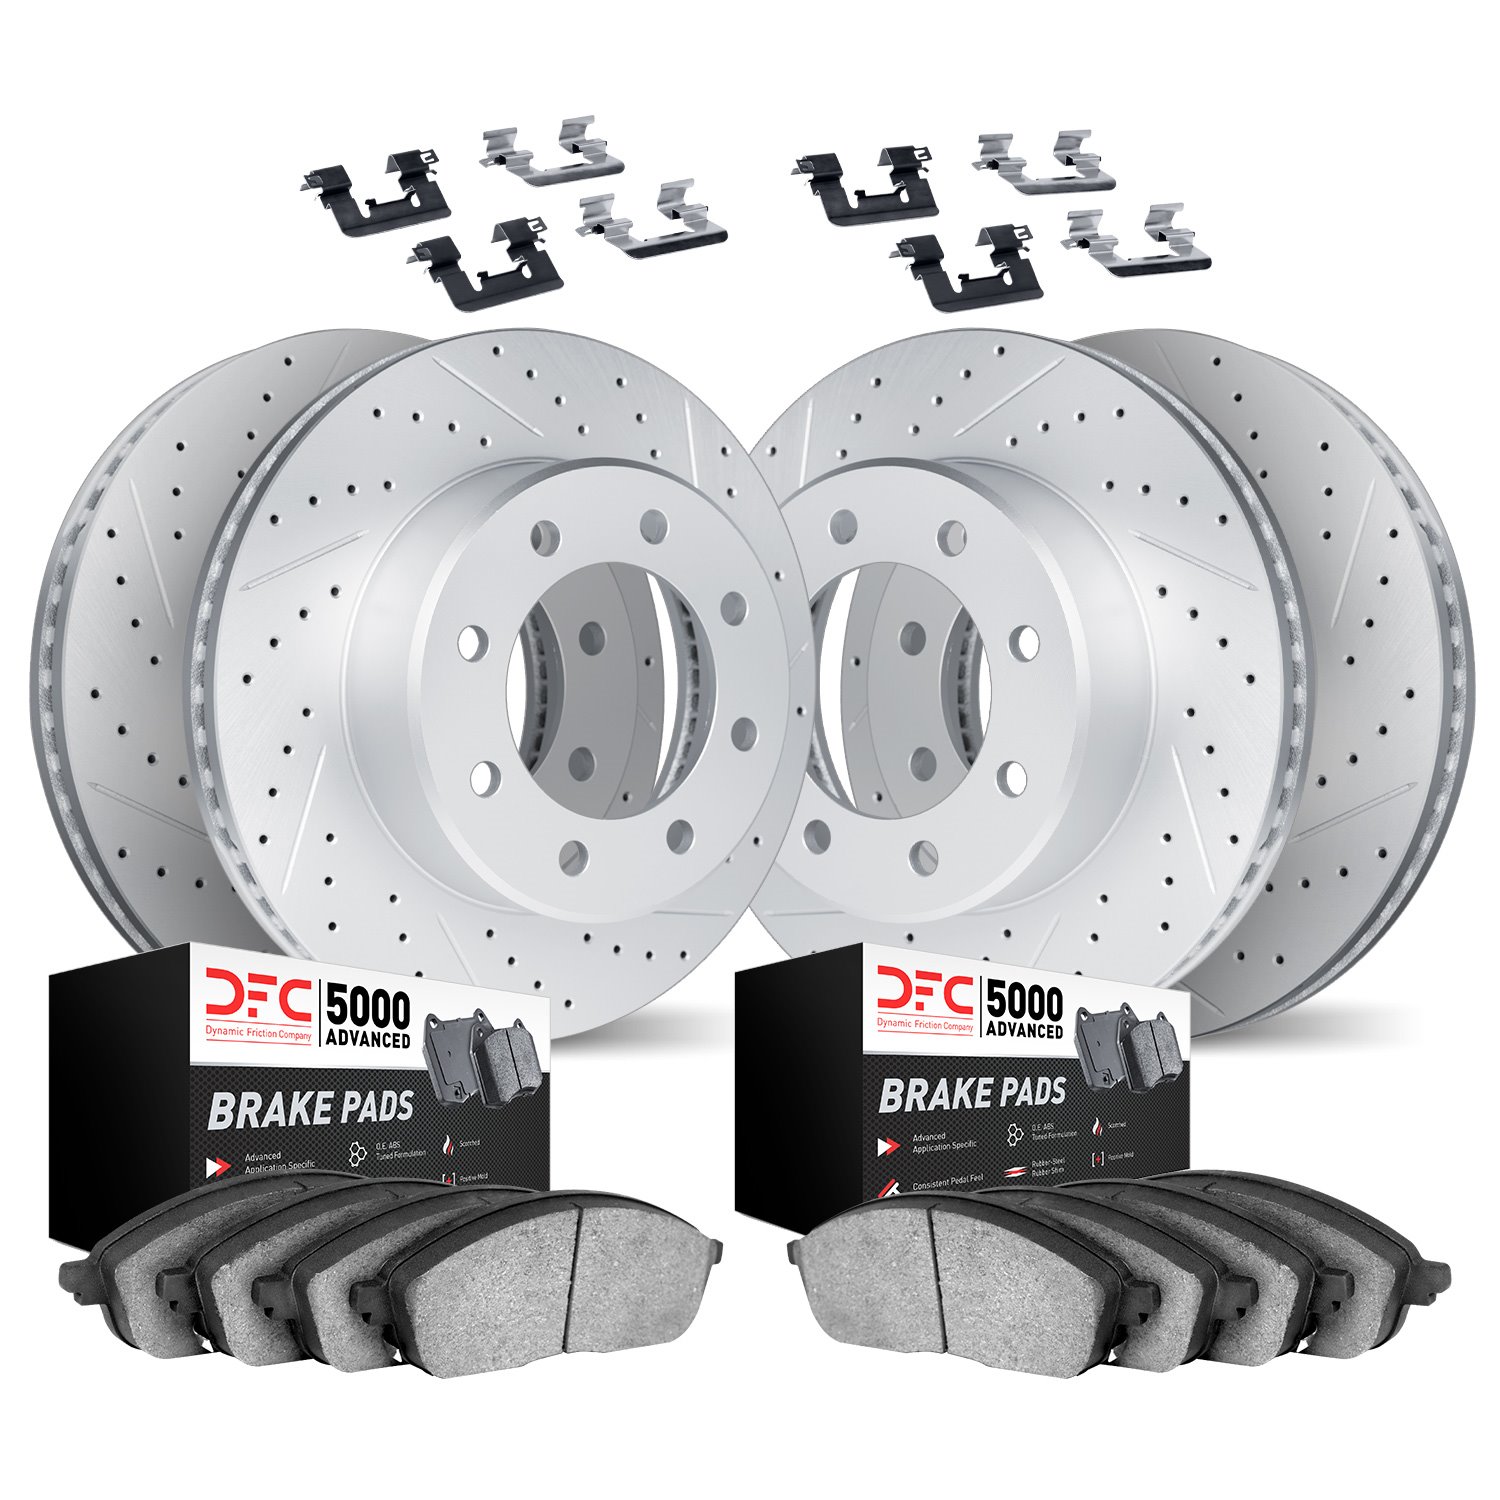 2514-48024 Geoperformance Drilled/Slotted Rotors w/5000 Advanced Brake Pads Kit & Hardware, 2001-2010 GM, Position: Front and Re